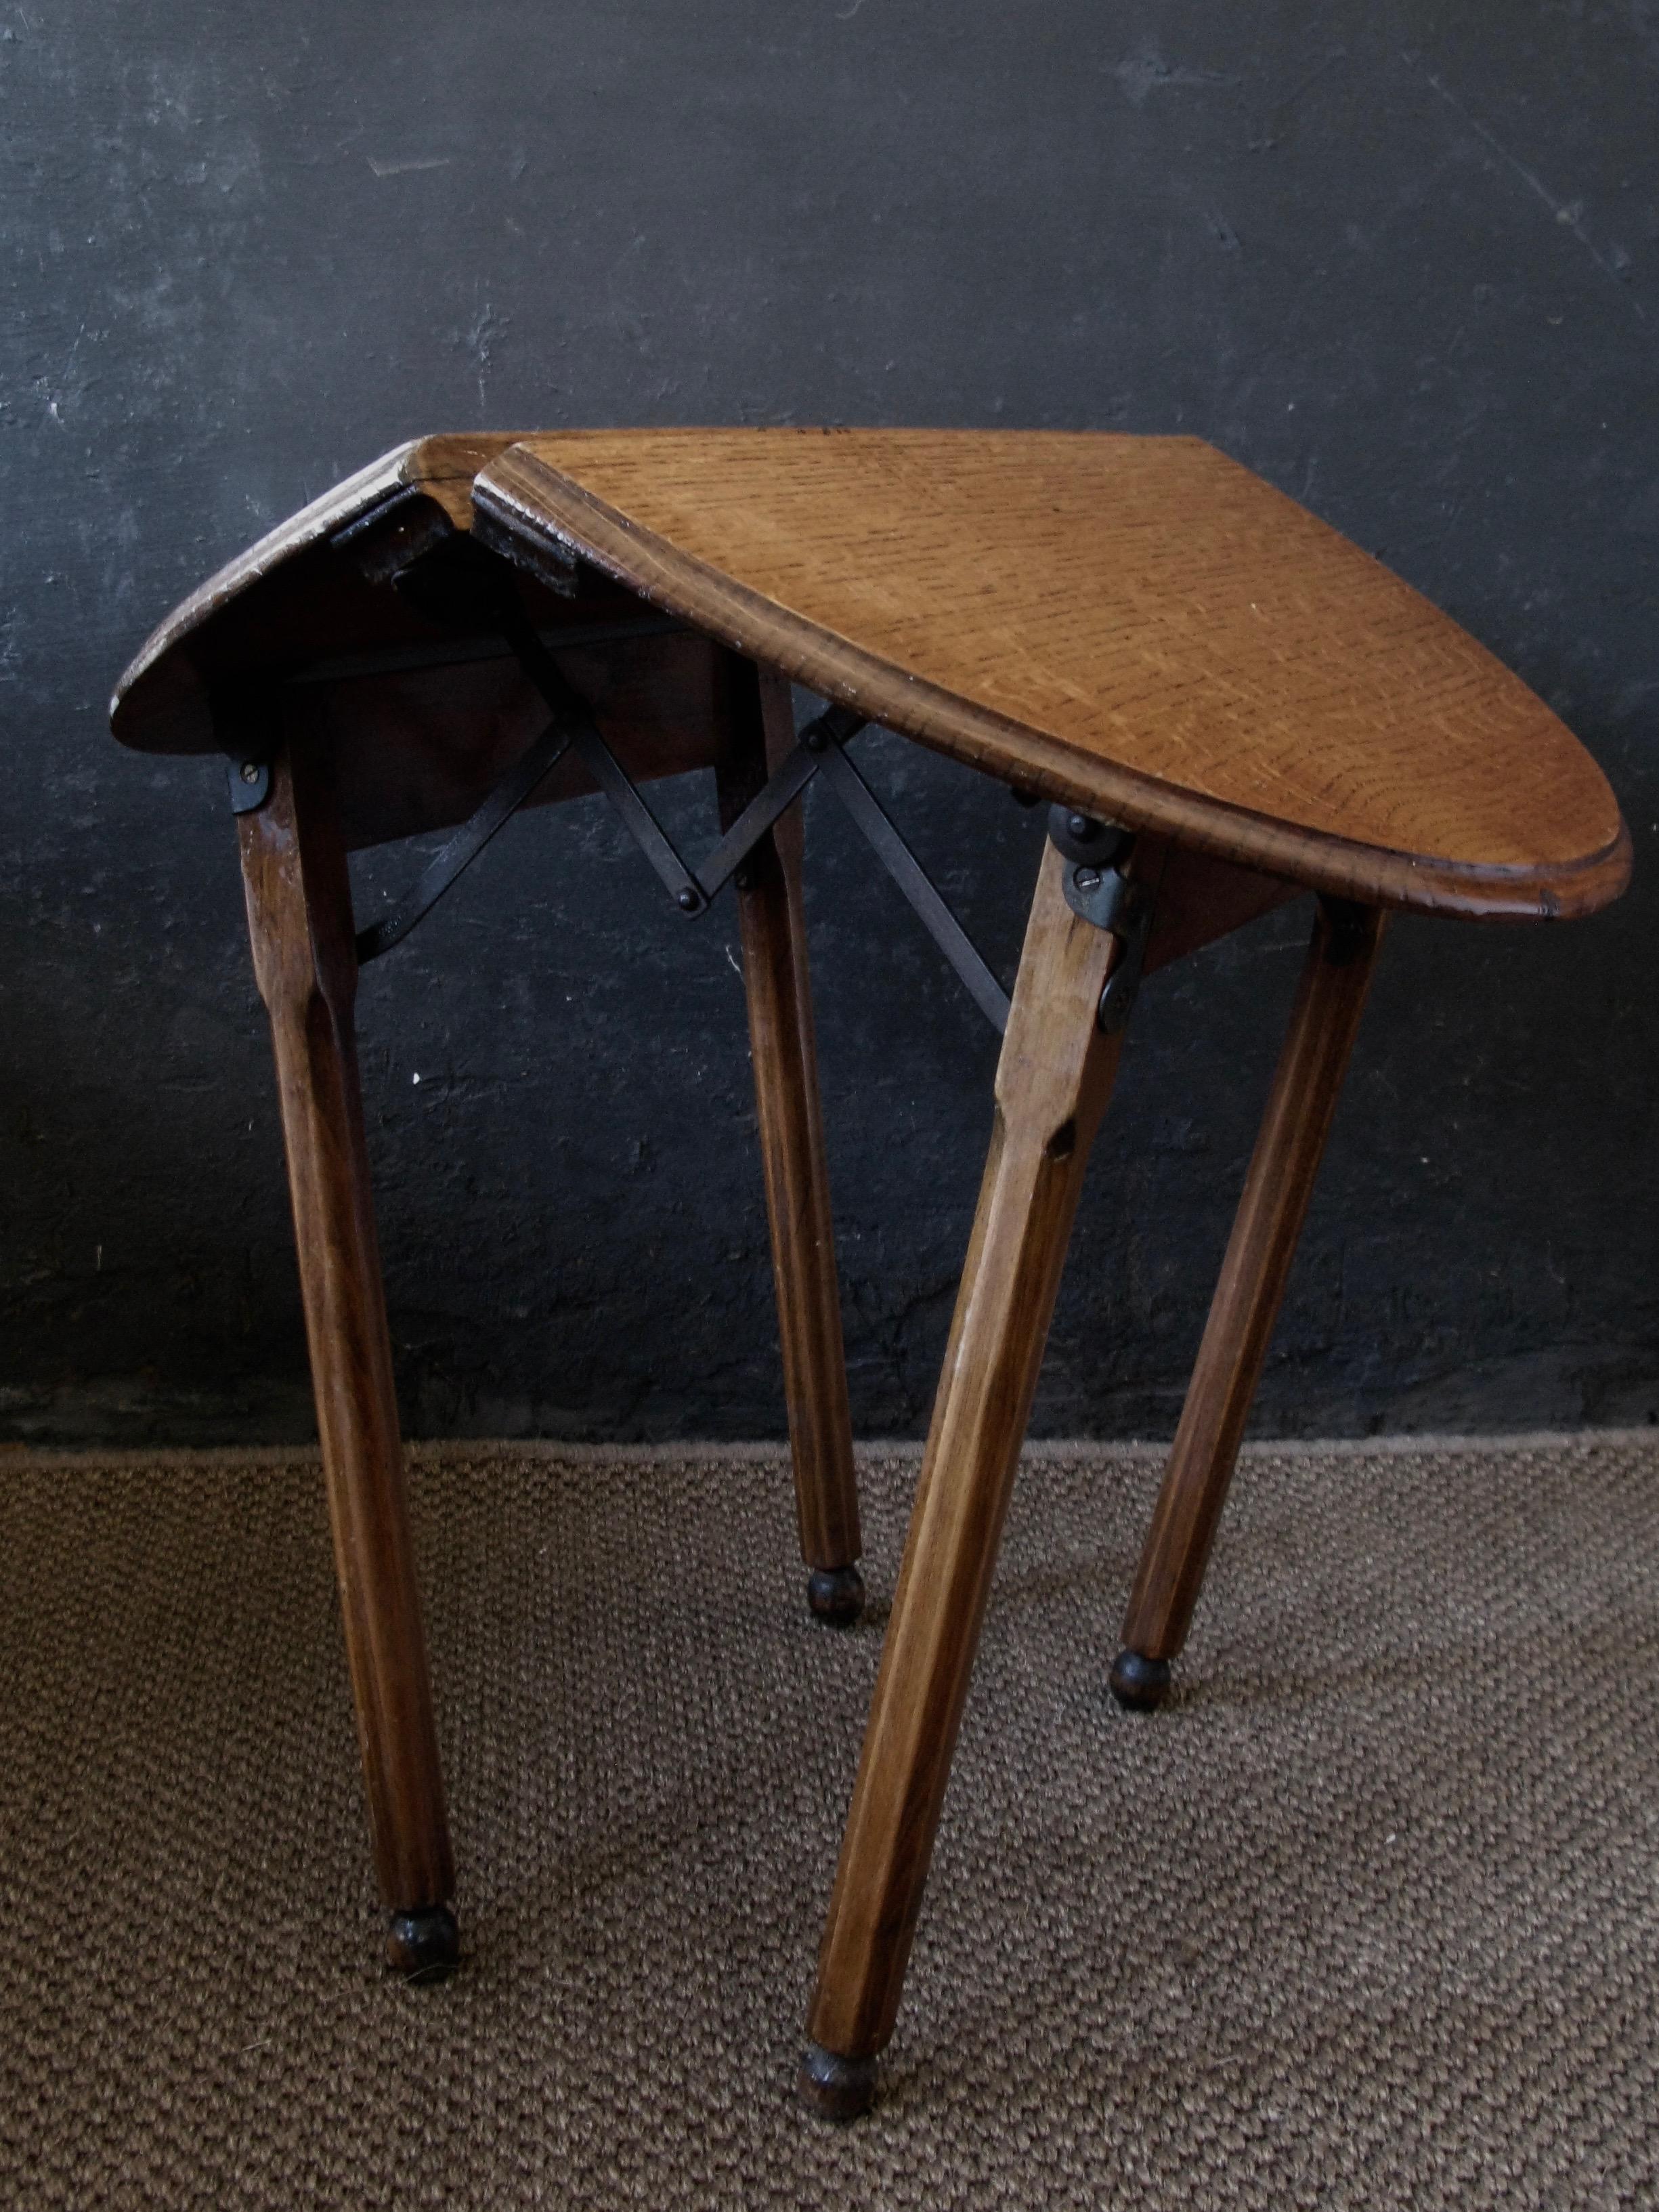 Polished Art Nouveau Arts & Crafts Small Occasional Oak Table England, Early 20th Century